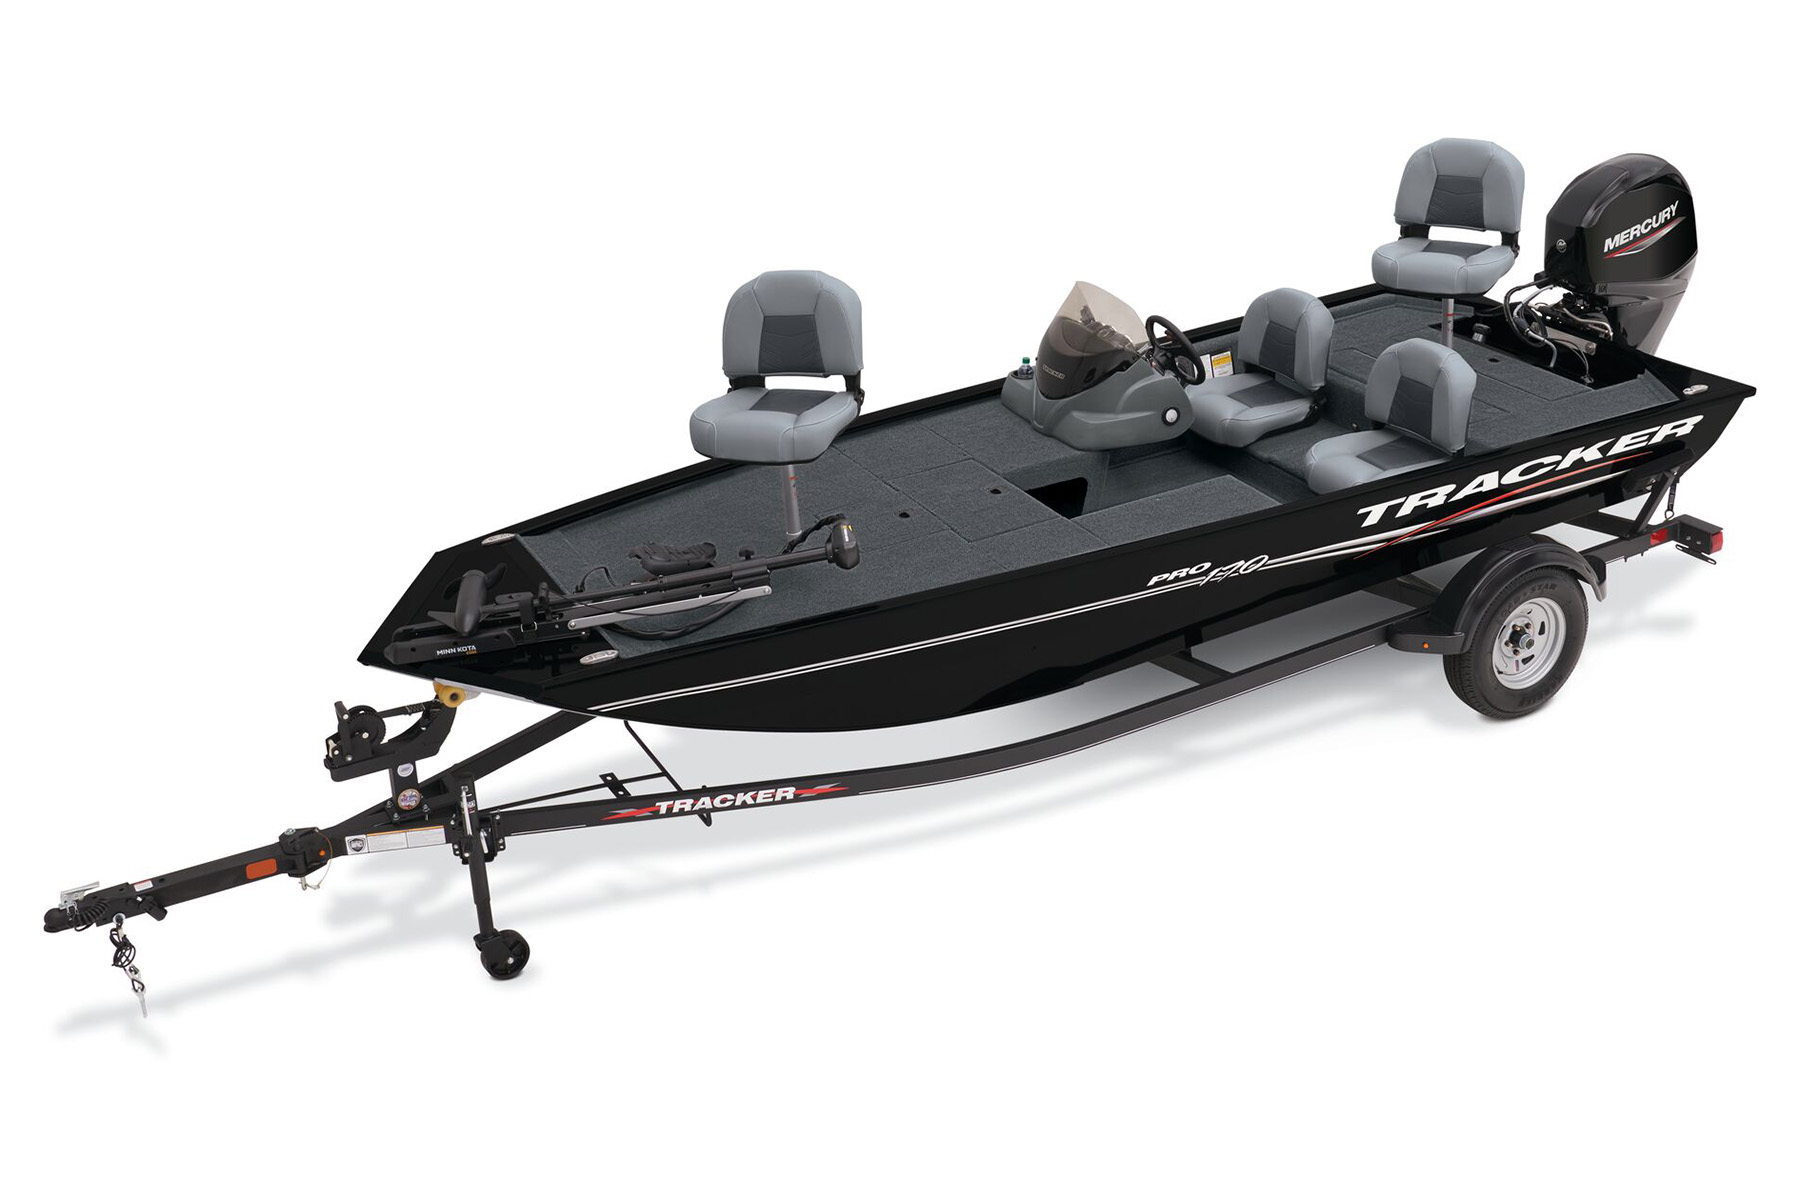 Affordable Used Bass Boats for Sale